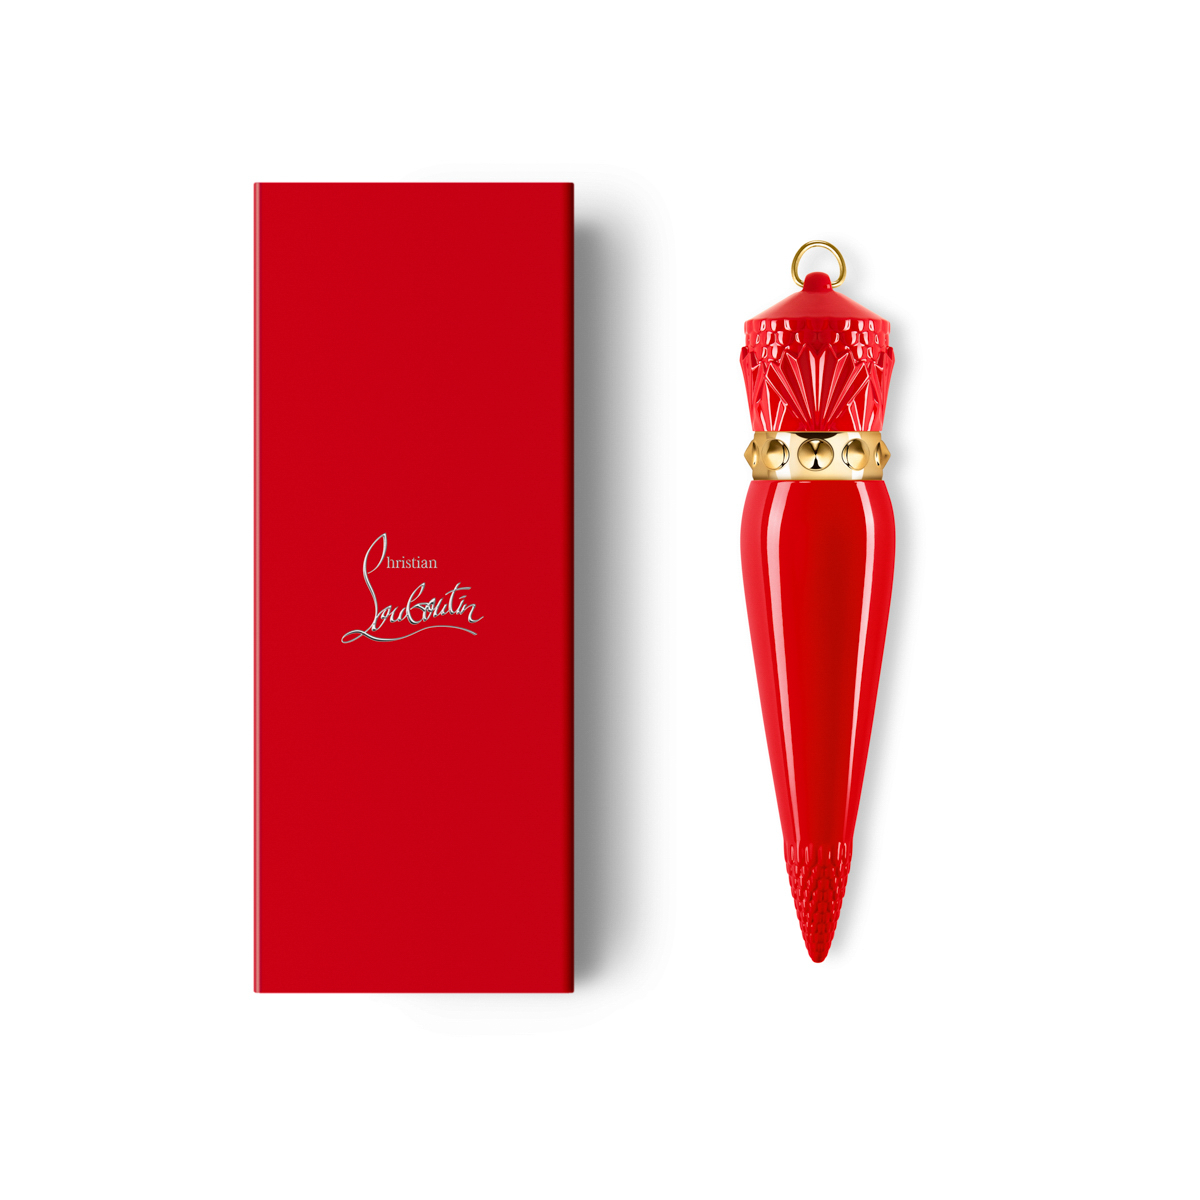 Christian Louboutin Rouge Louboutin So Glow Refill in Coral Palace